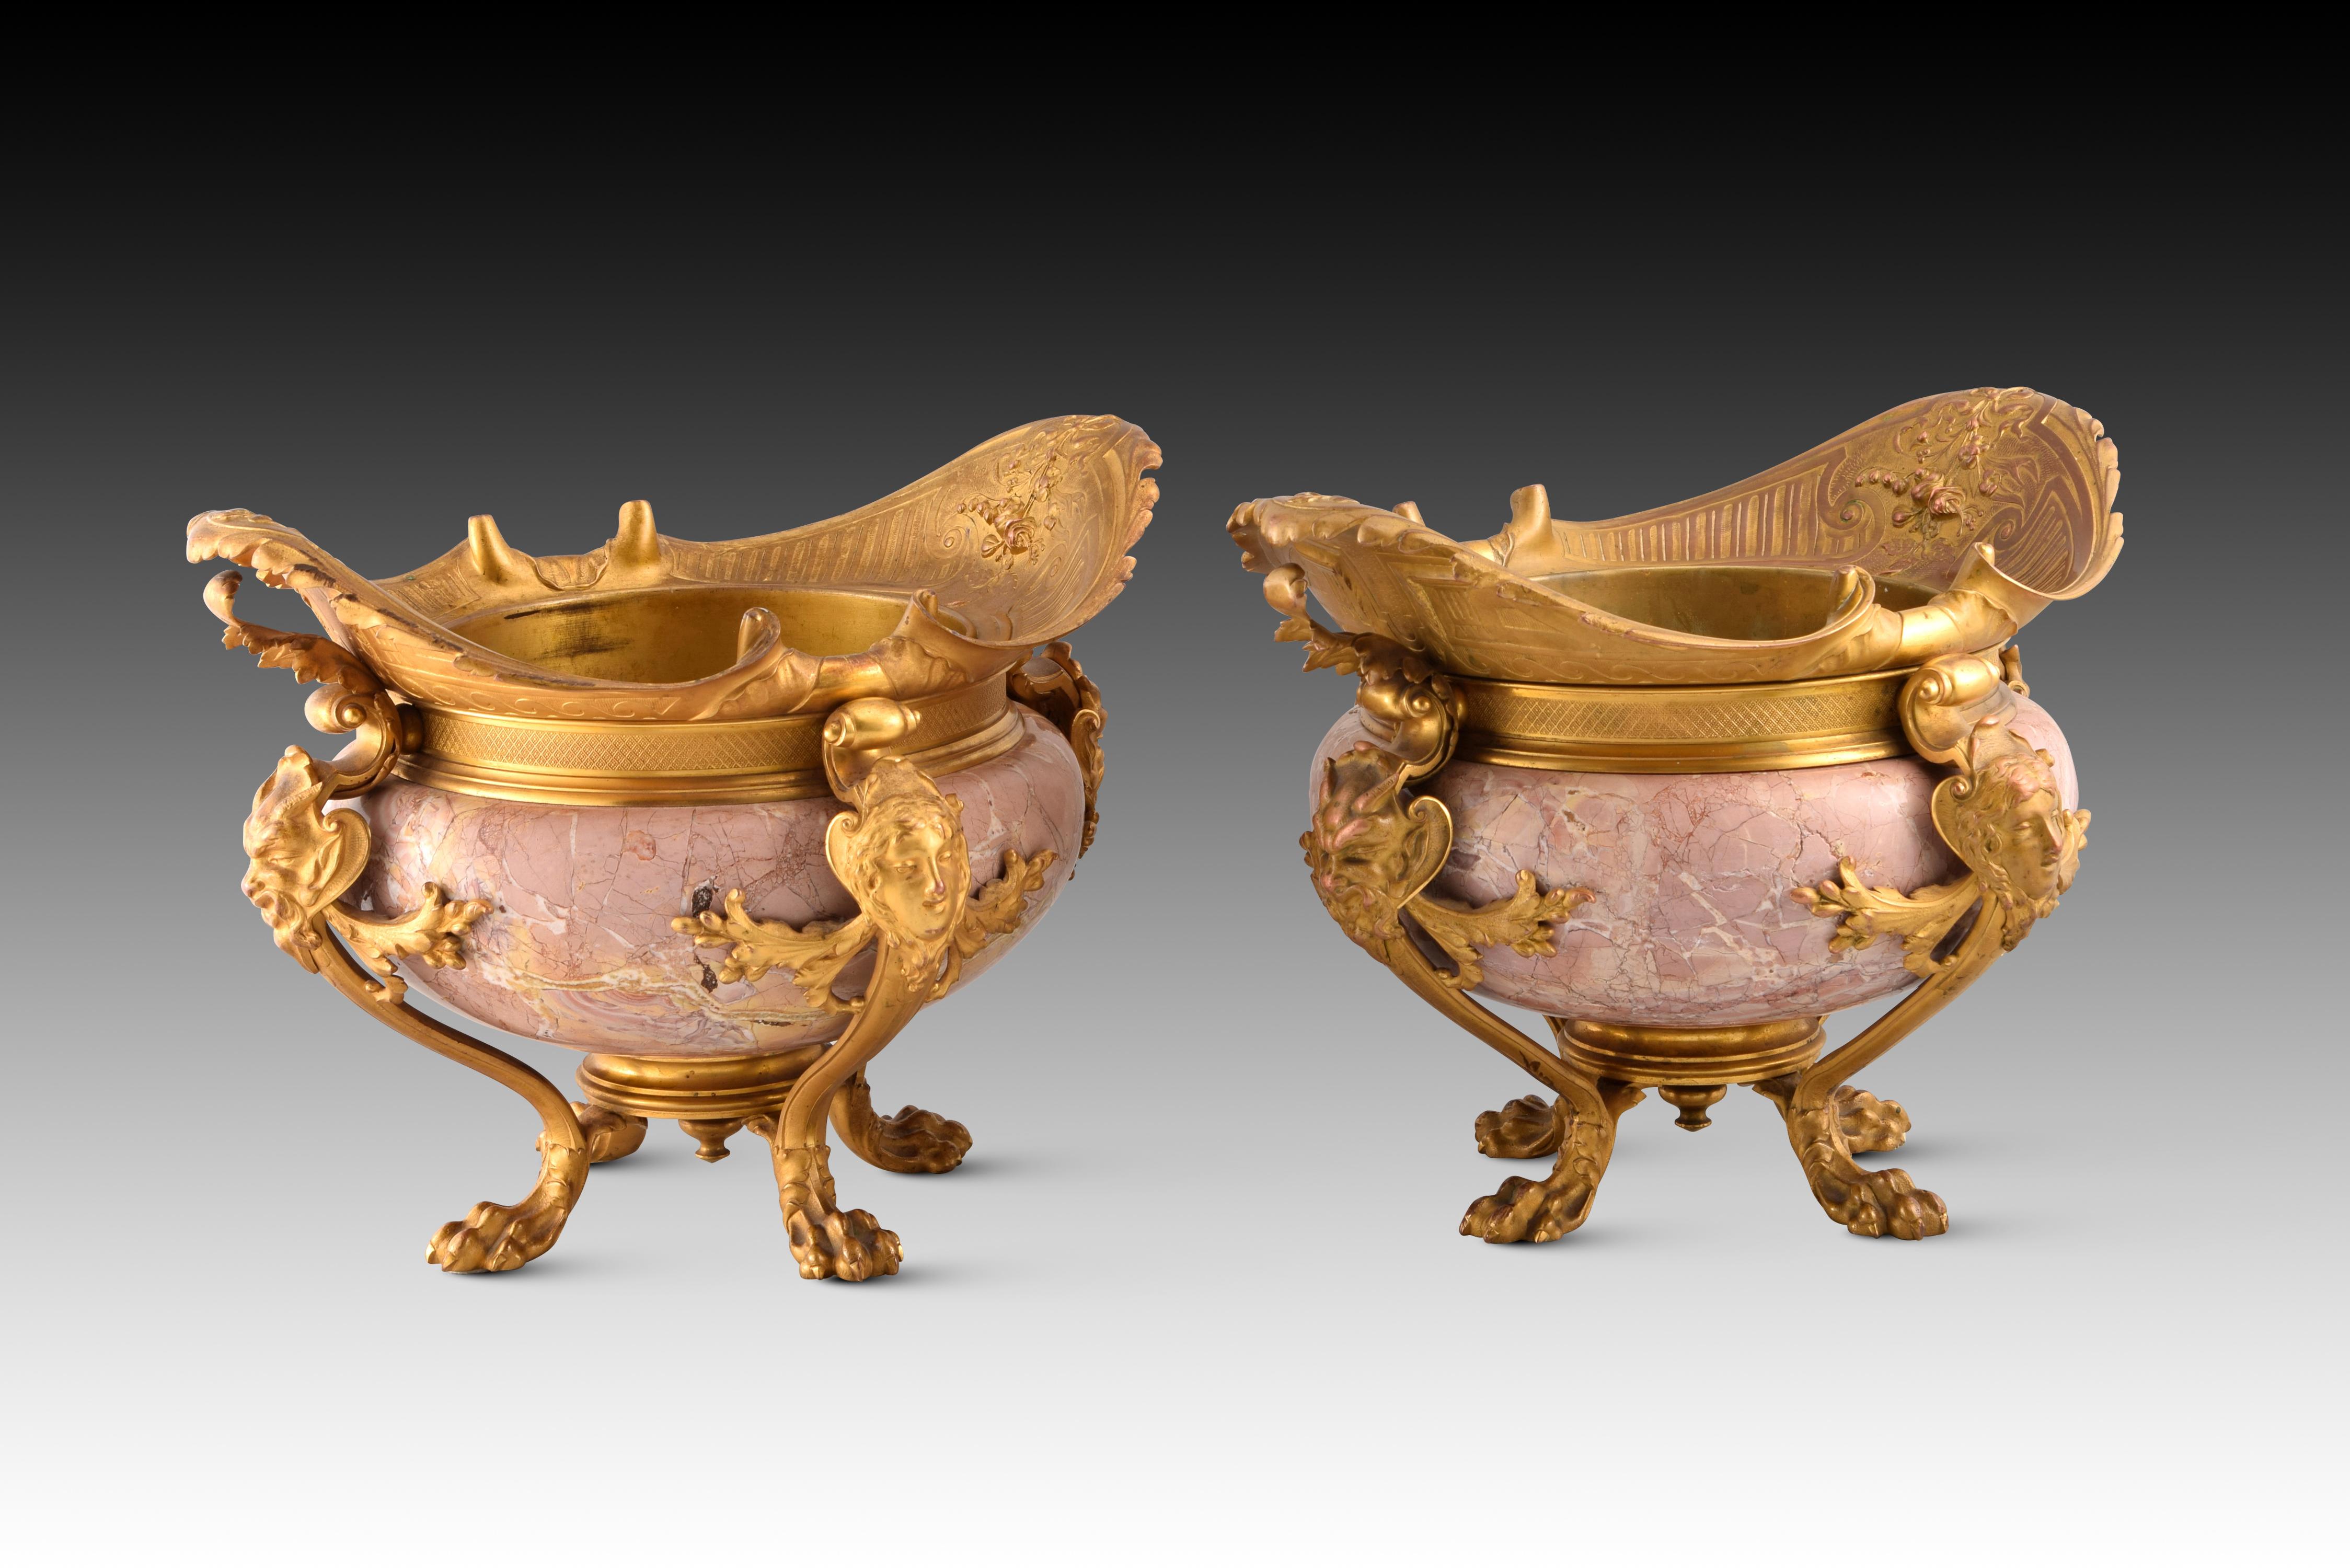 French Pair of Centerpieces. Ormolu, Marble. France, Late 19th Century